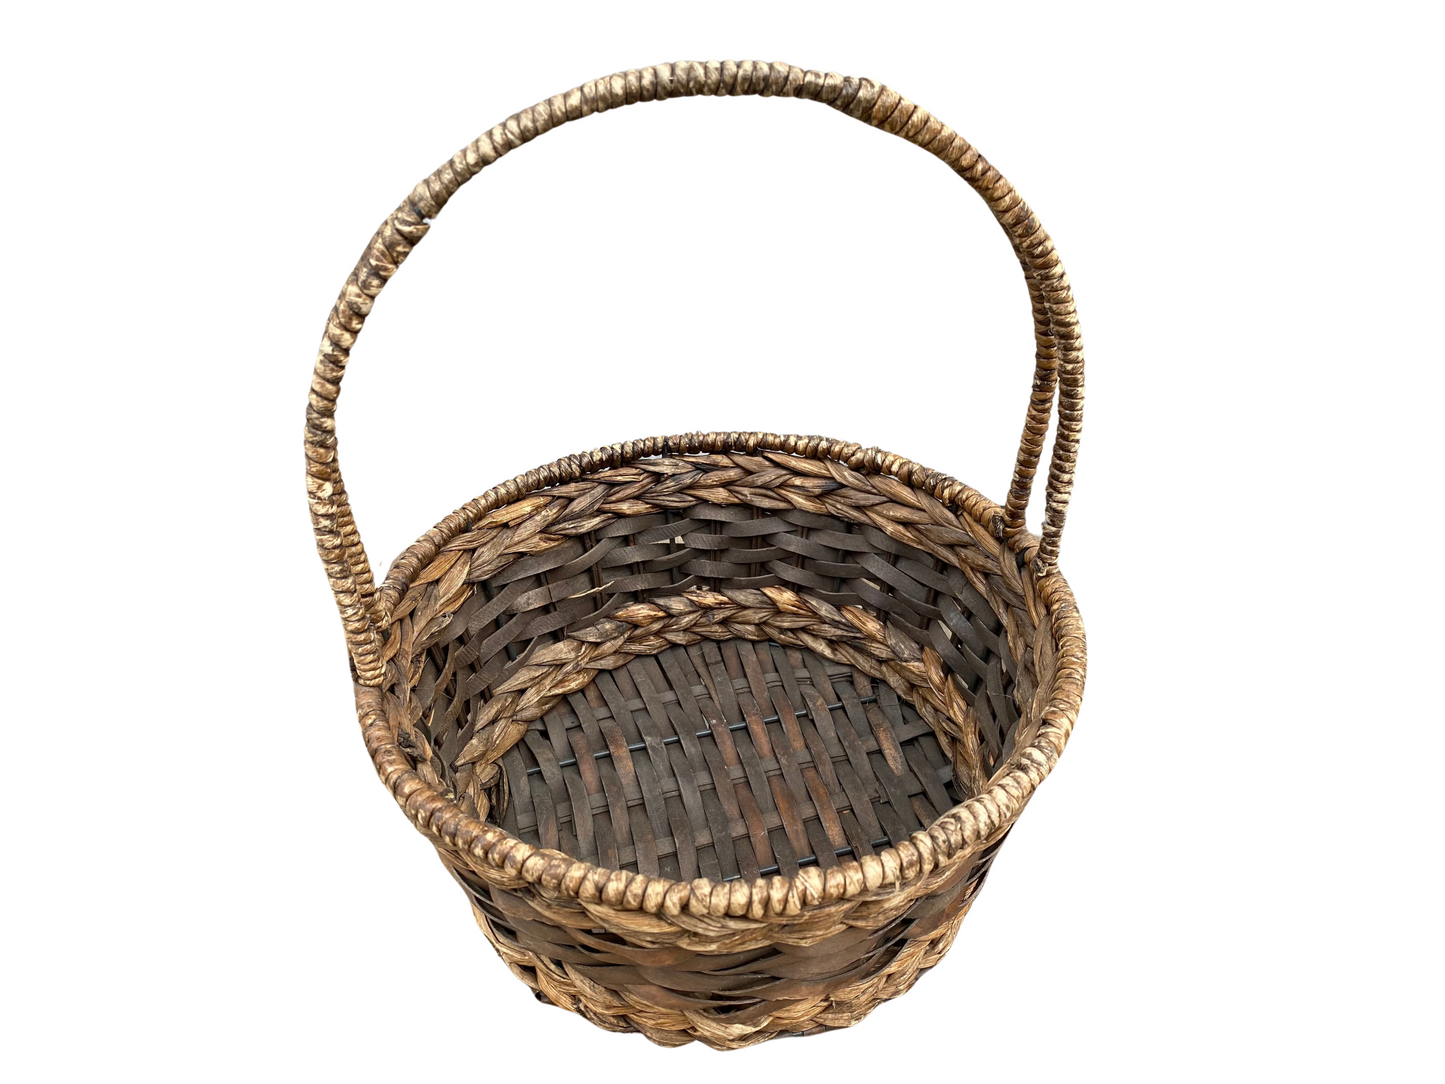 Two Tone Brown Woven Basket with Handle